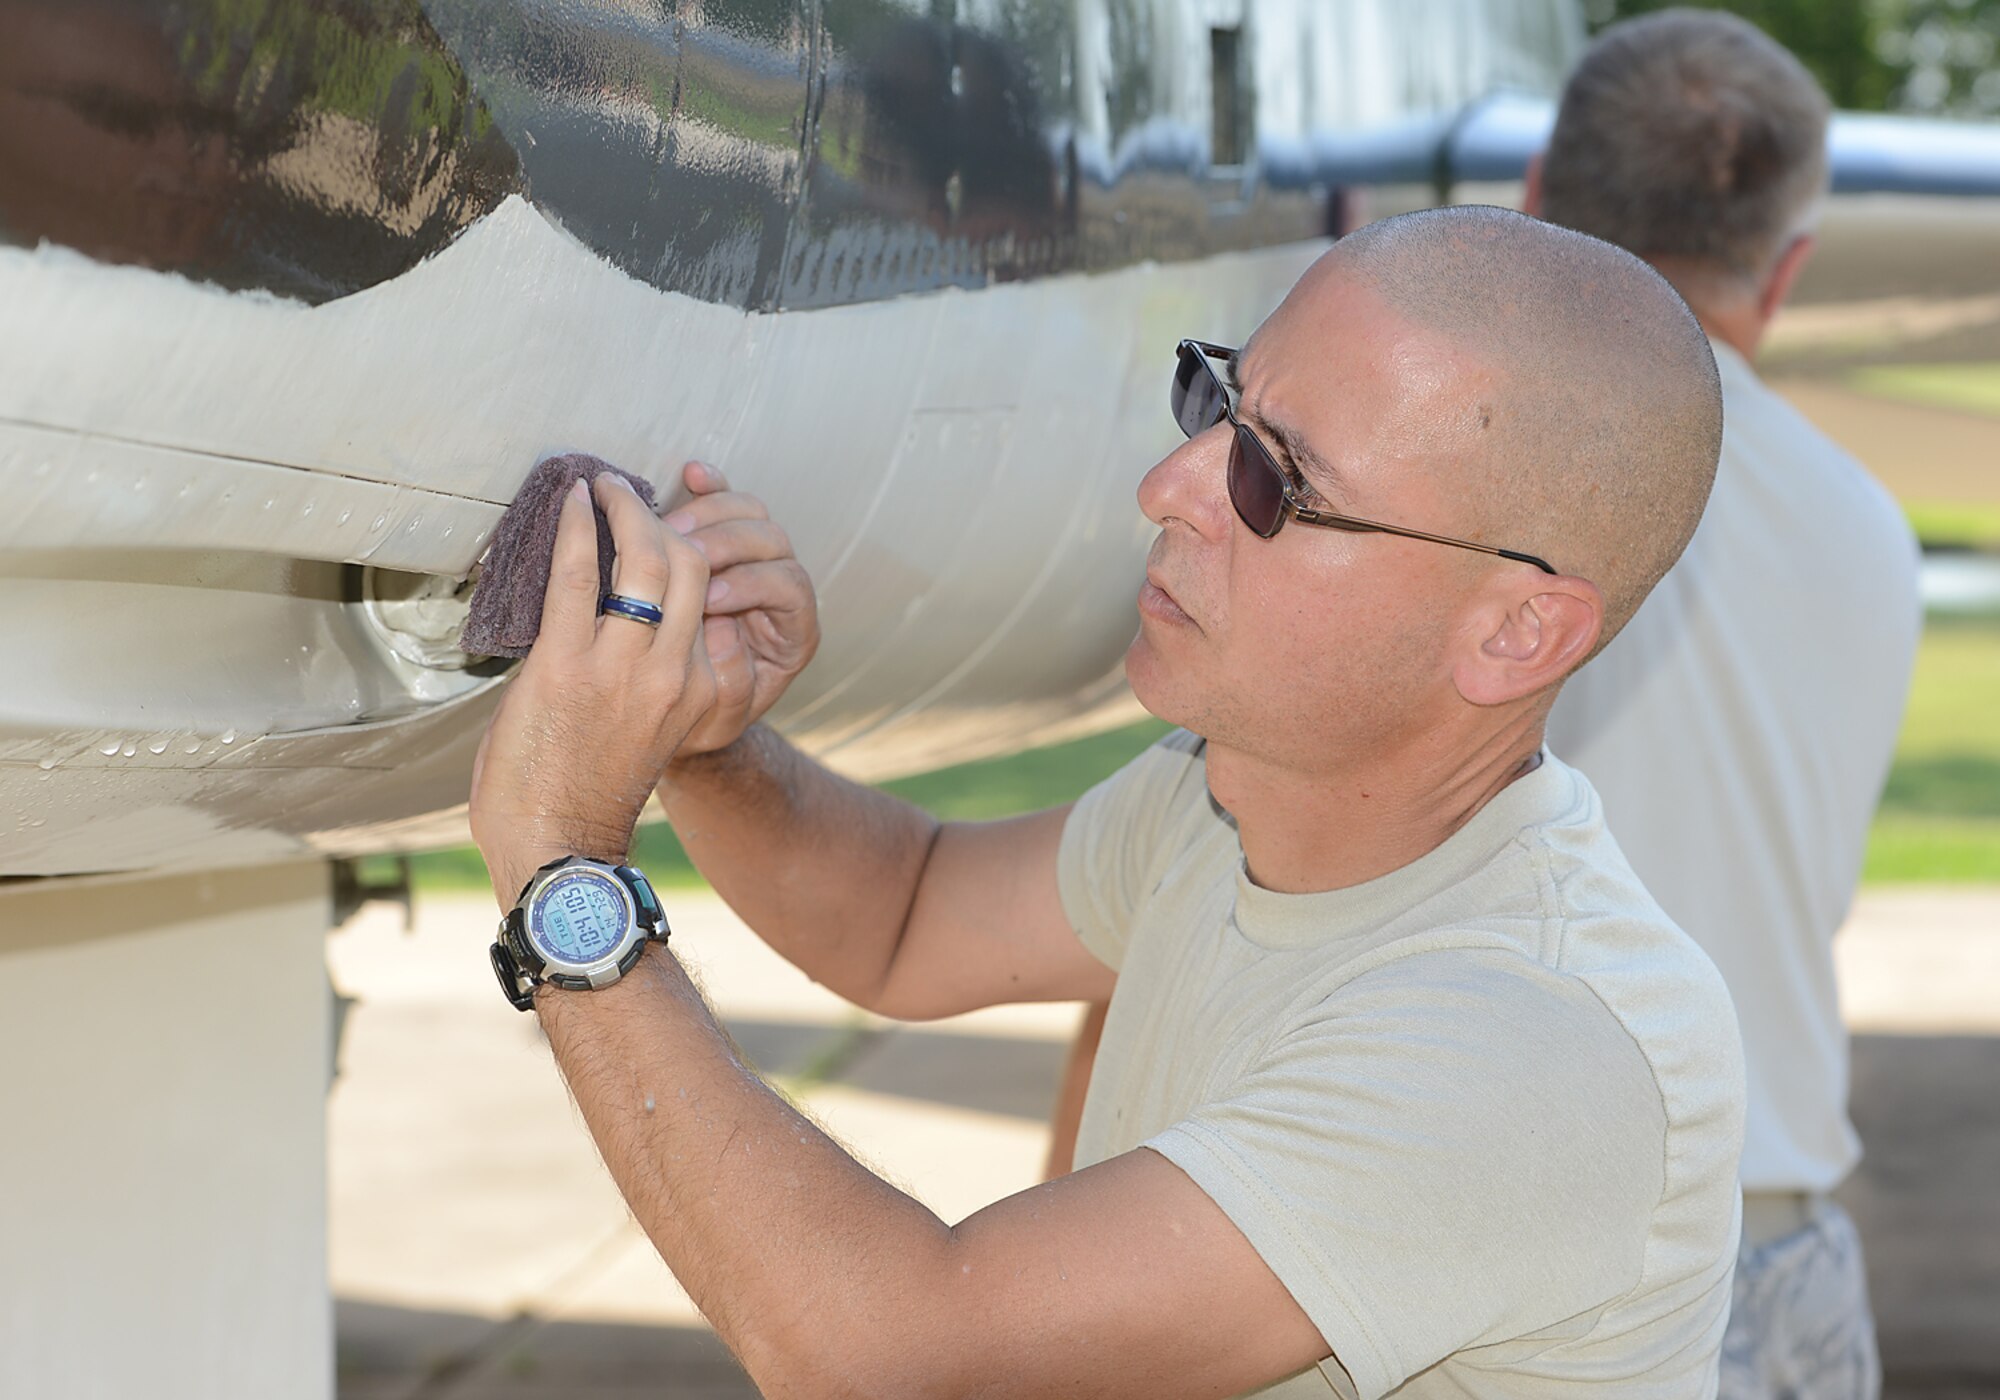 Chief Master Sergeant Dennis Dipiazzo, 138th Communication Flight Chief, scrubs dirt from the fuselage of an F-100 static display aircraft at the Tulsa Air National Guard base, Tulsa Okla., 29 July 2014.  Members of the 138th FW Chiefs Council gathered to wash the static aircraft in an effort to keep them looking nice for public display.  (U.S. National Guard photo by Senior Master Sgt.  Preston L. Chasteen/Released)